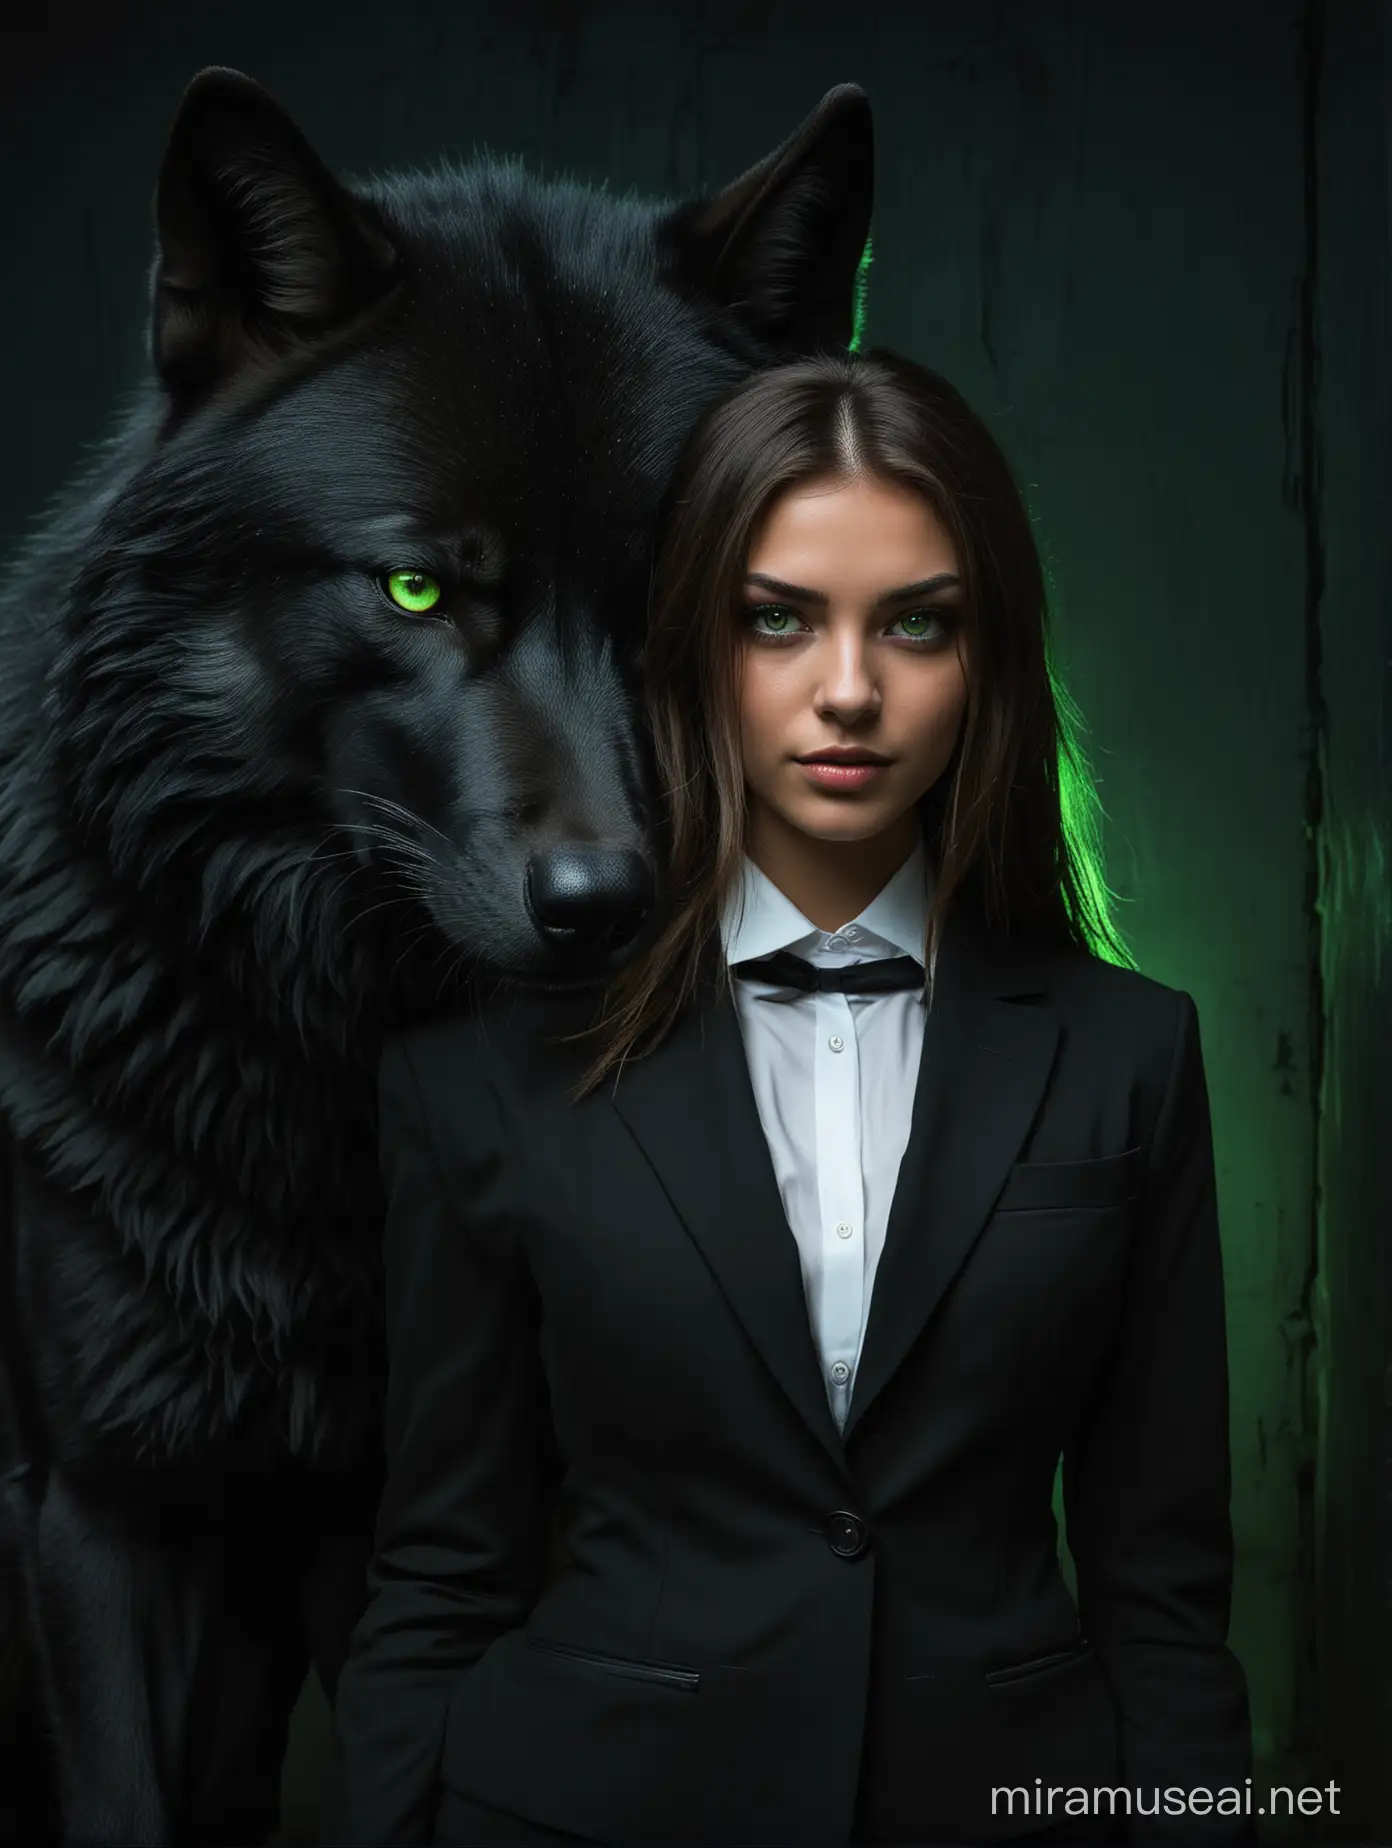 Seductive Woman in Black Suit Stands Beside Fearsome GreenEyed Wolf